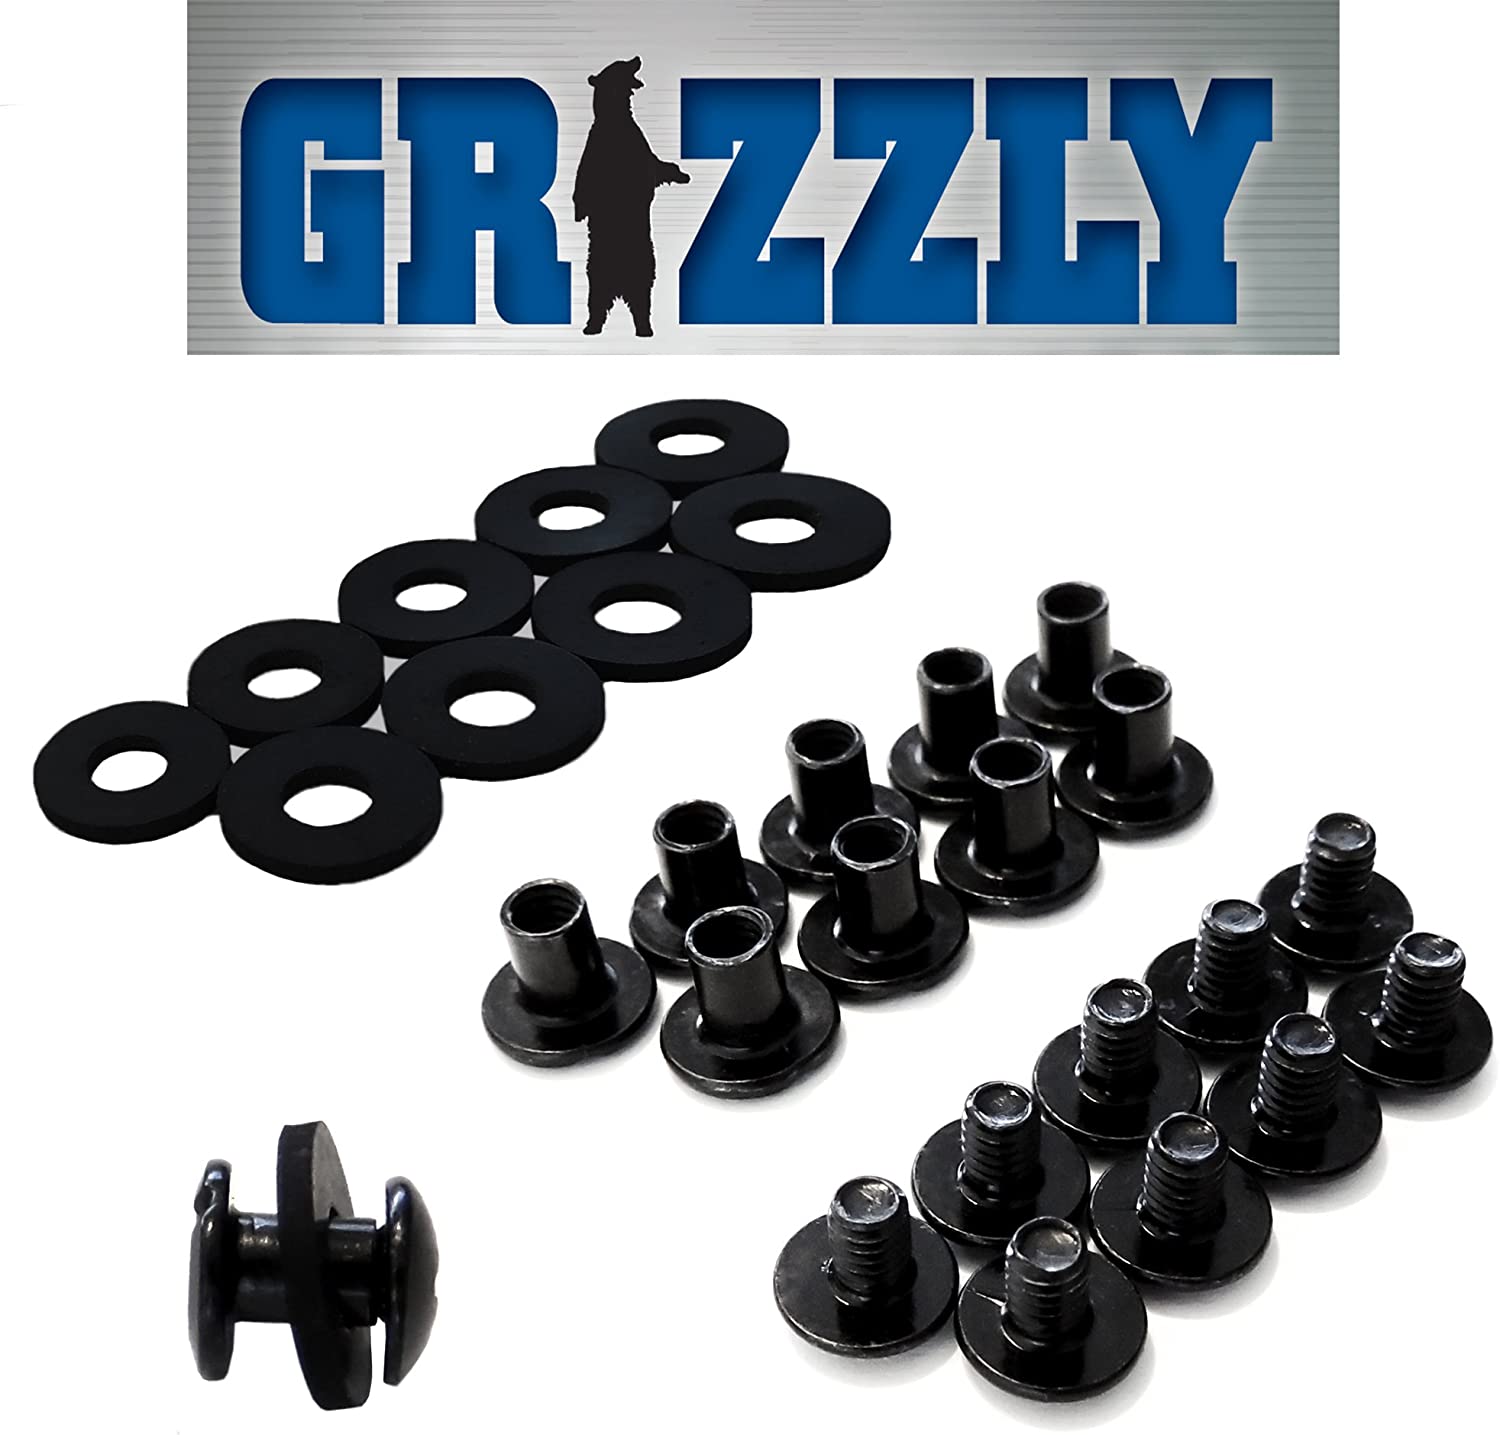 Grizzly Black Chicago Screws For Leather/Kydex Gun Holsters/Clips and Knife Sheaths 1/4 Inch - 20 Pack